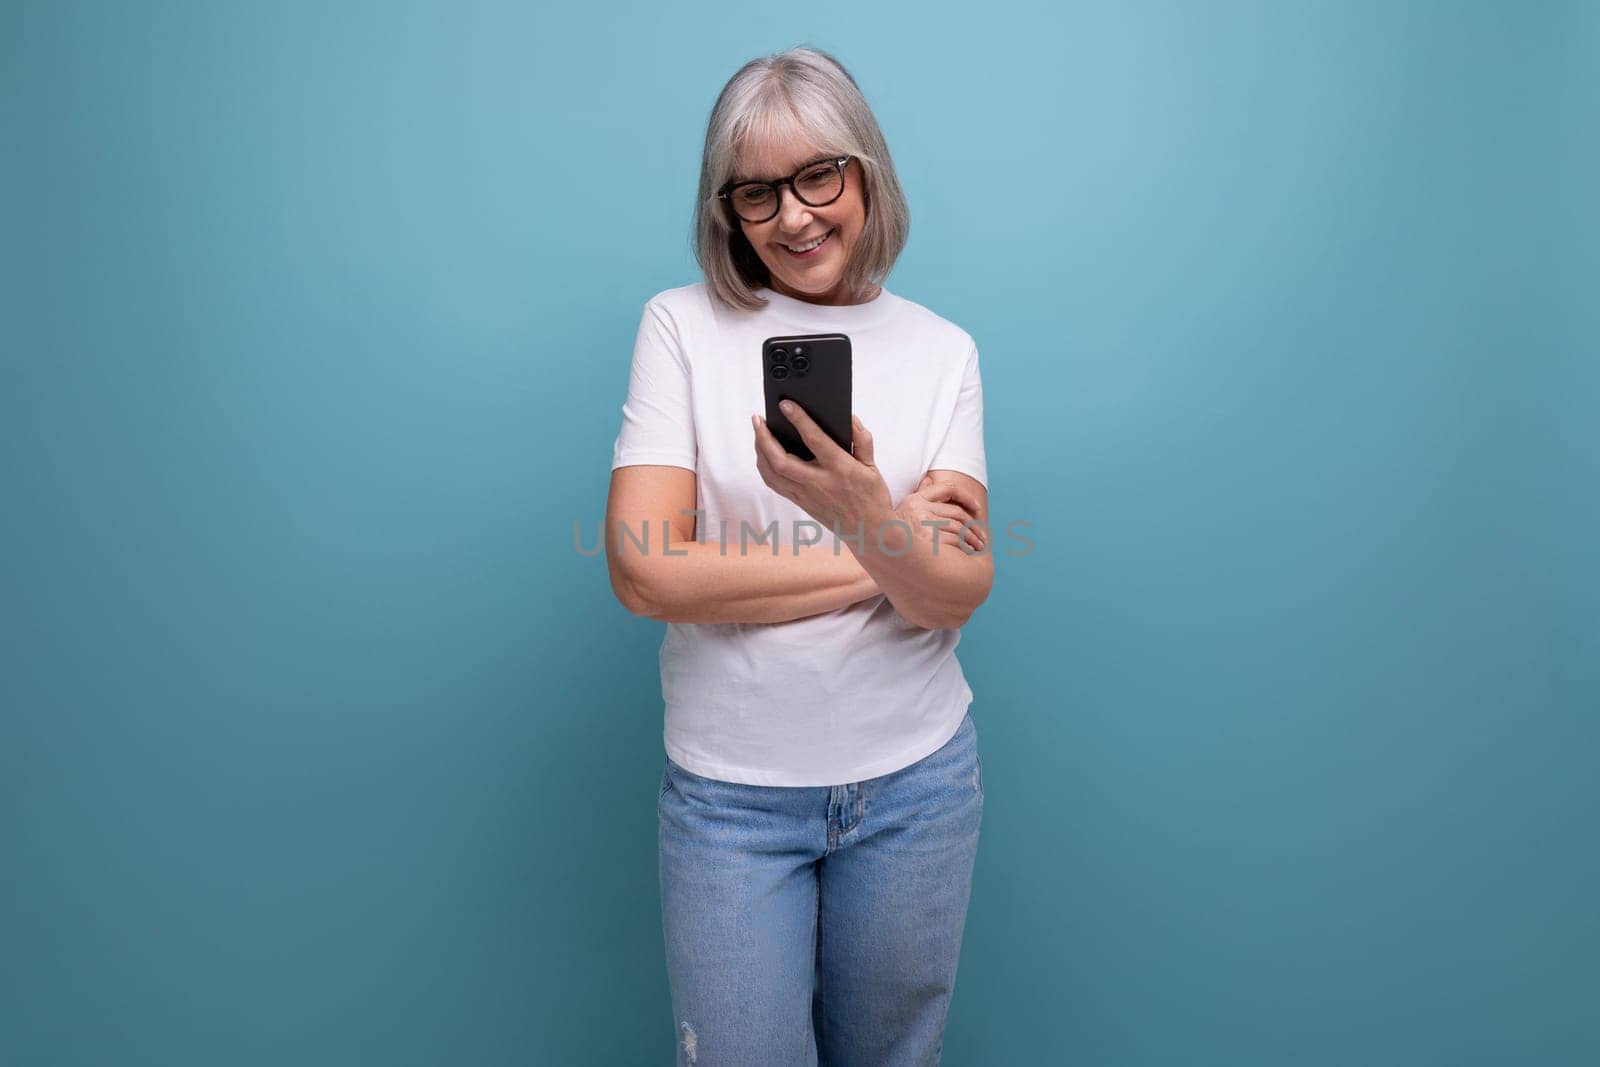 gray-haired mature woman studying digital technology smartphone on a bright studio background.